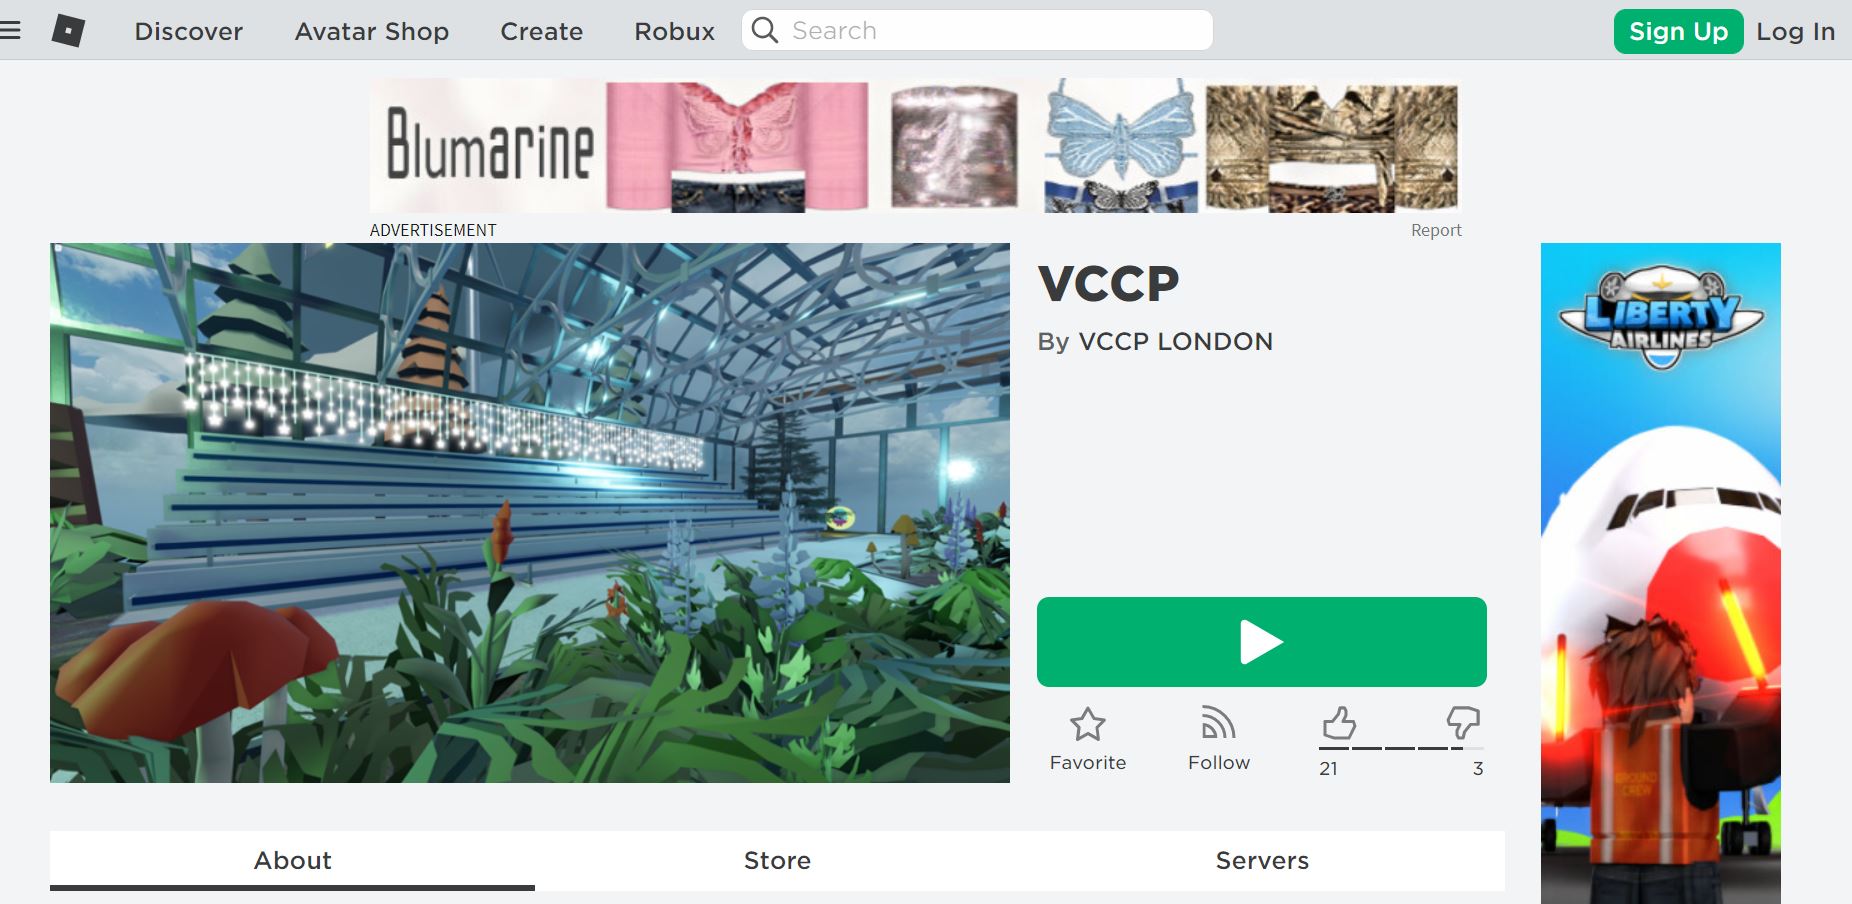 VCCP builds office in Roblox to immerse agency in gaming - VCCP Madrid